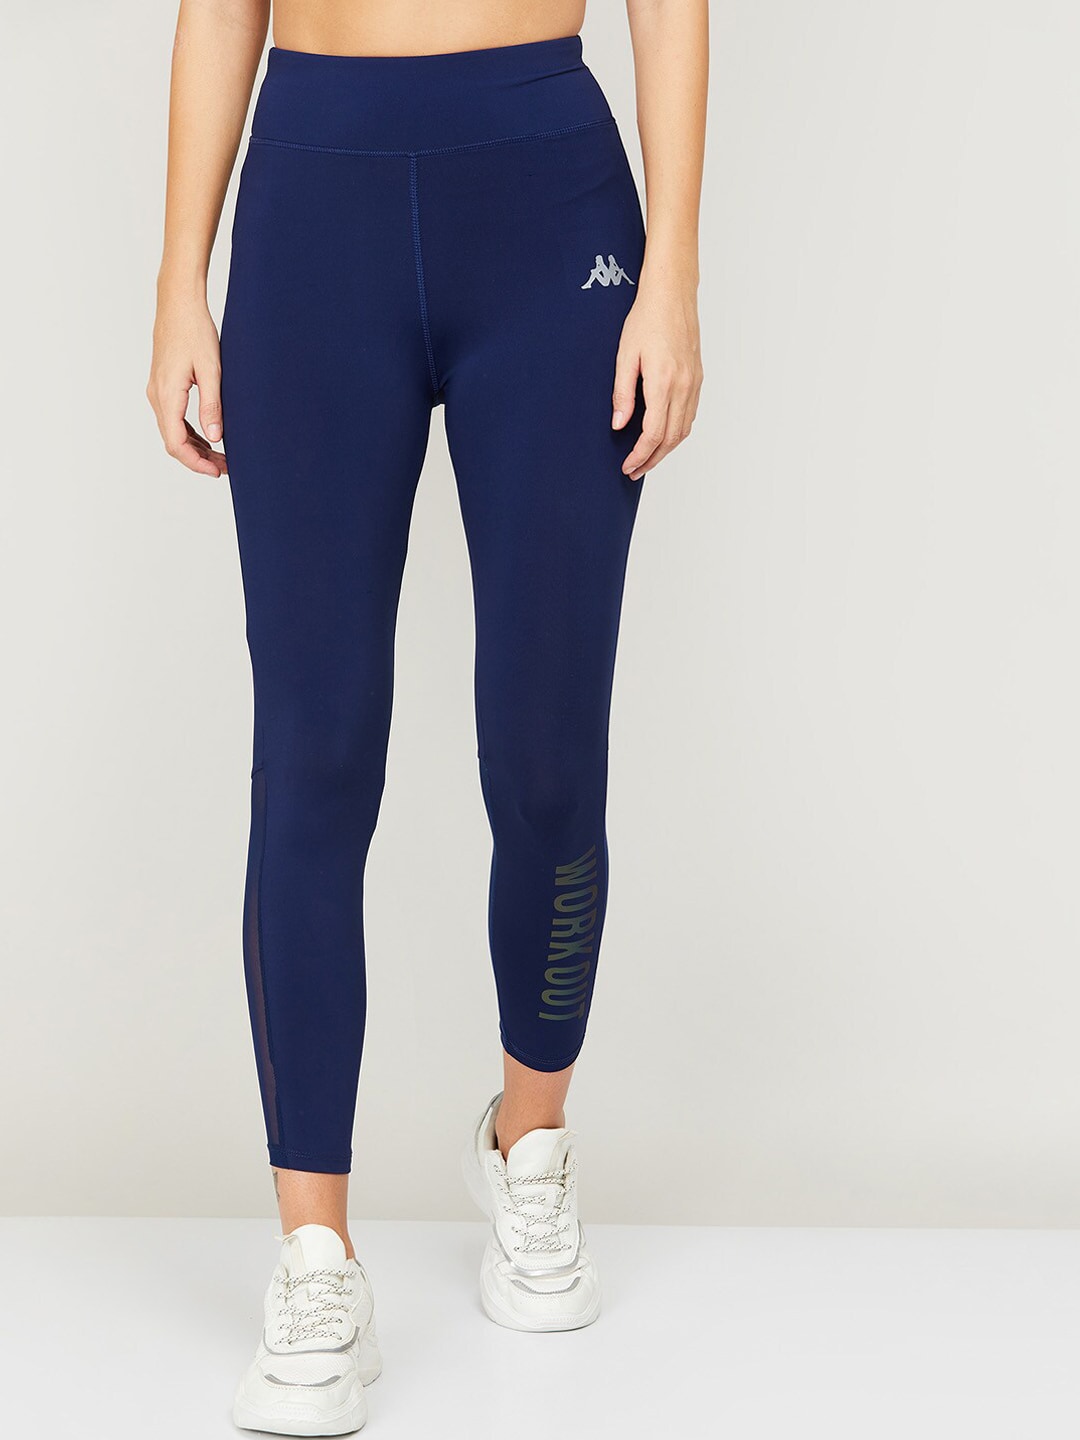 Kappa Women Blue Solid Ankle Length Training Tights Price in India